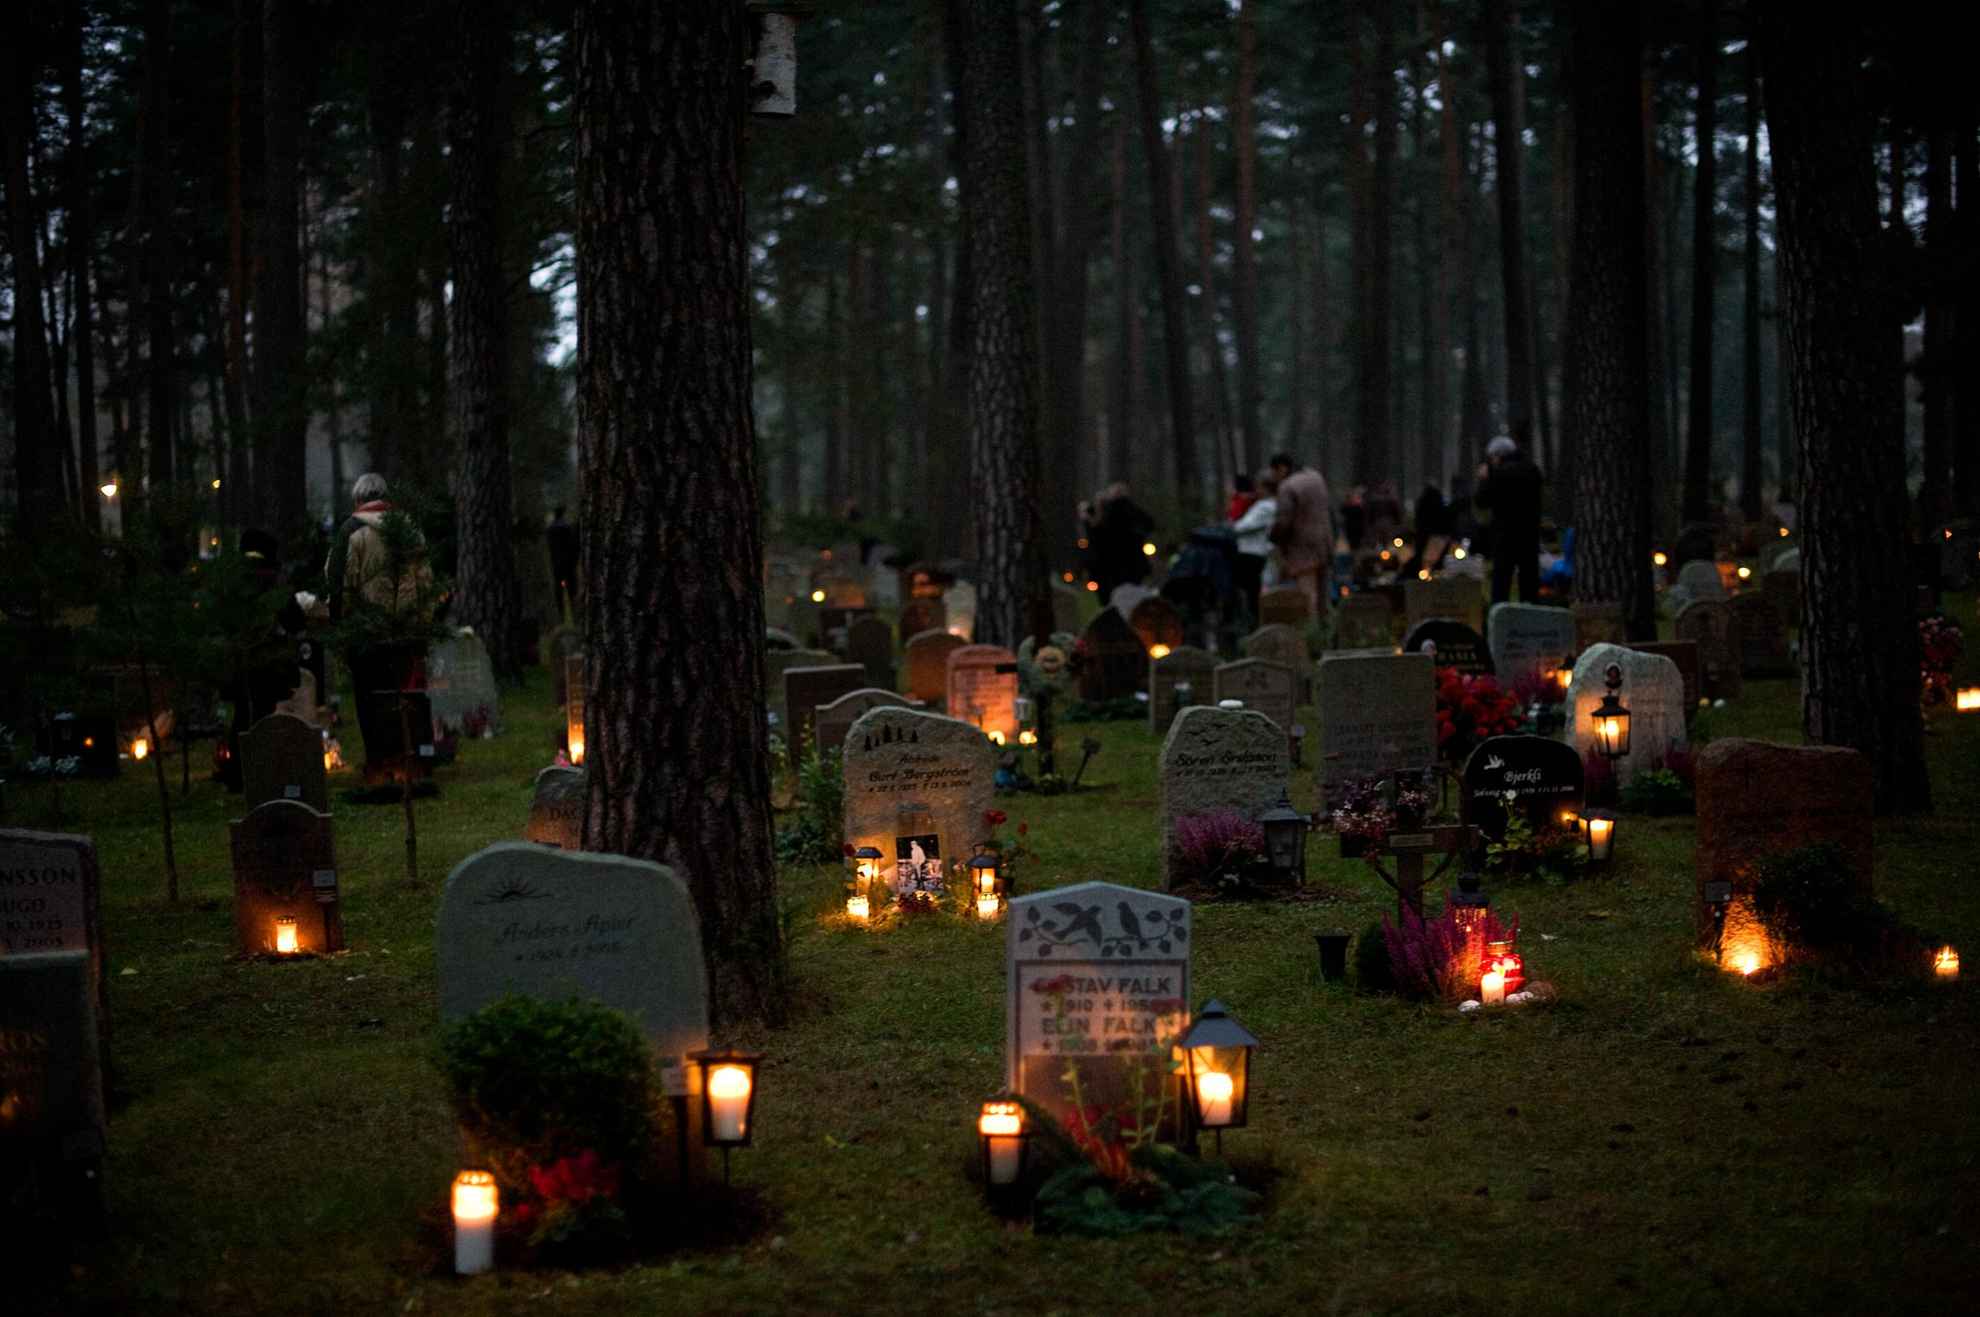 A graveyard in the forest with gravestones in the dark with candles and lanterns lit next to them.